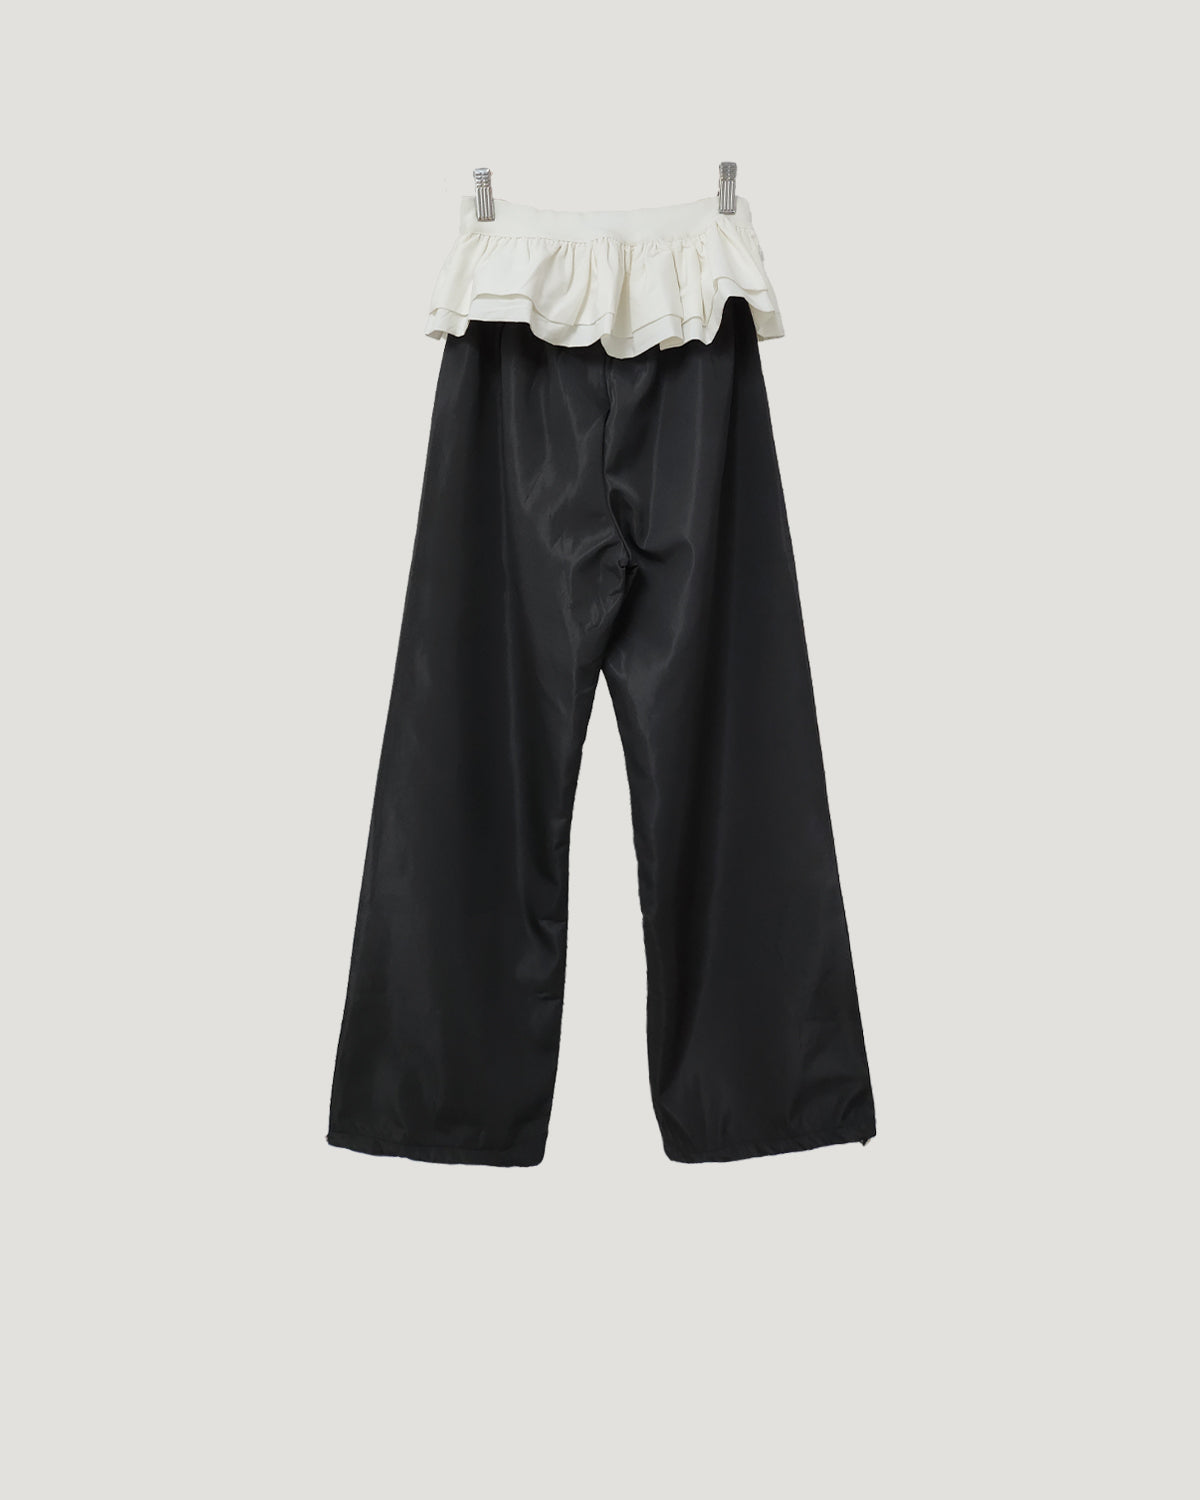 multiway frill pants